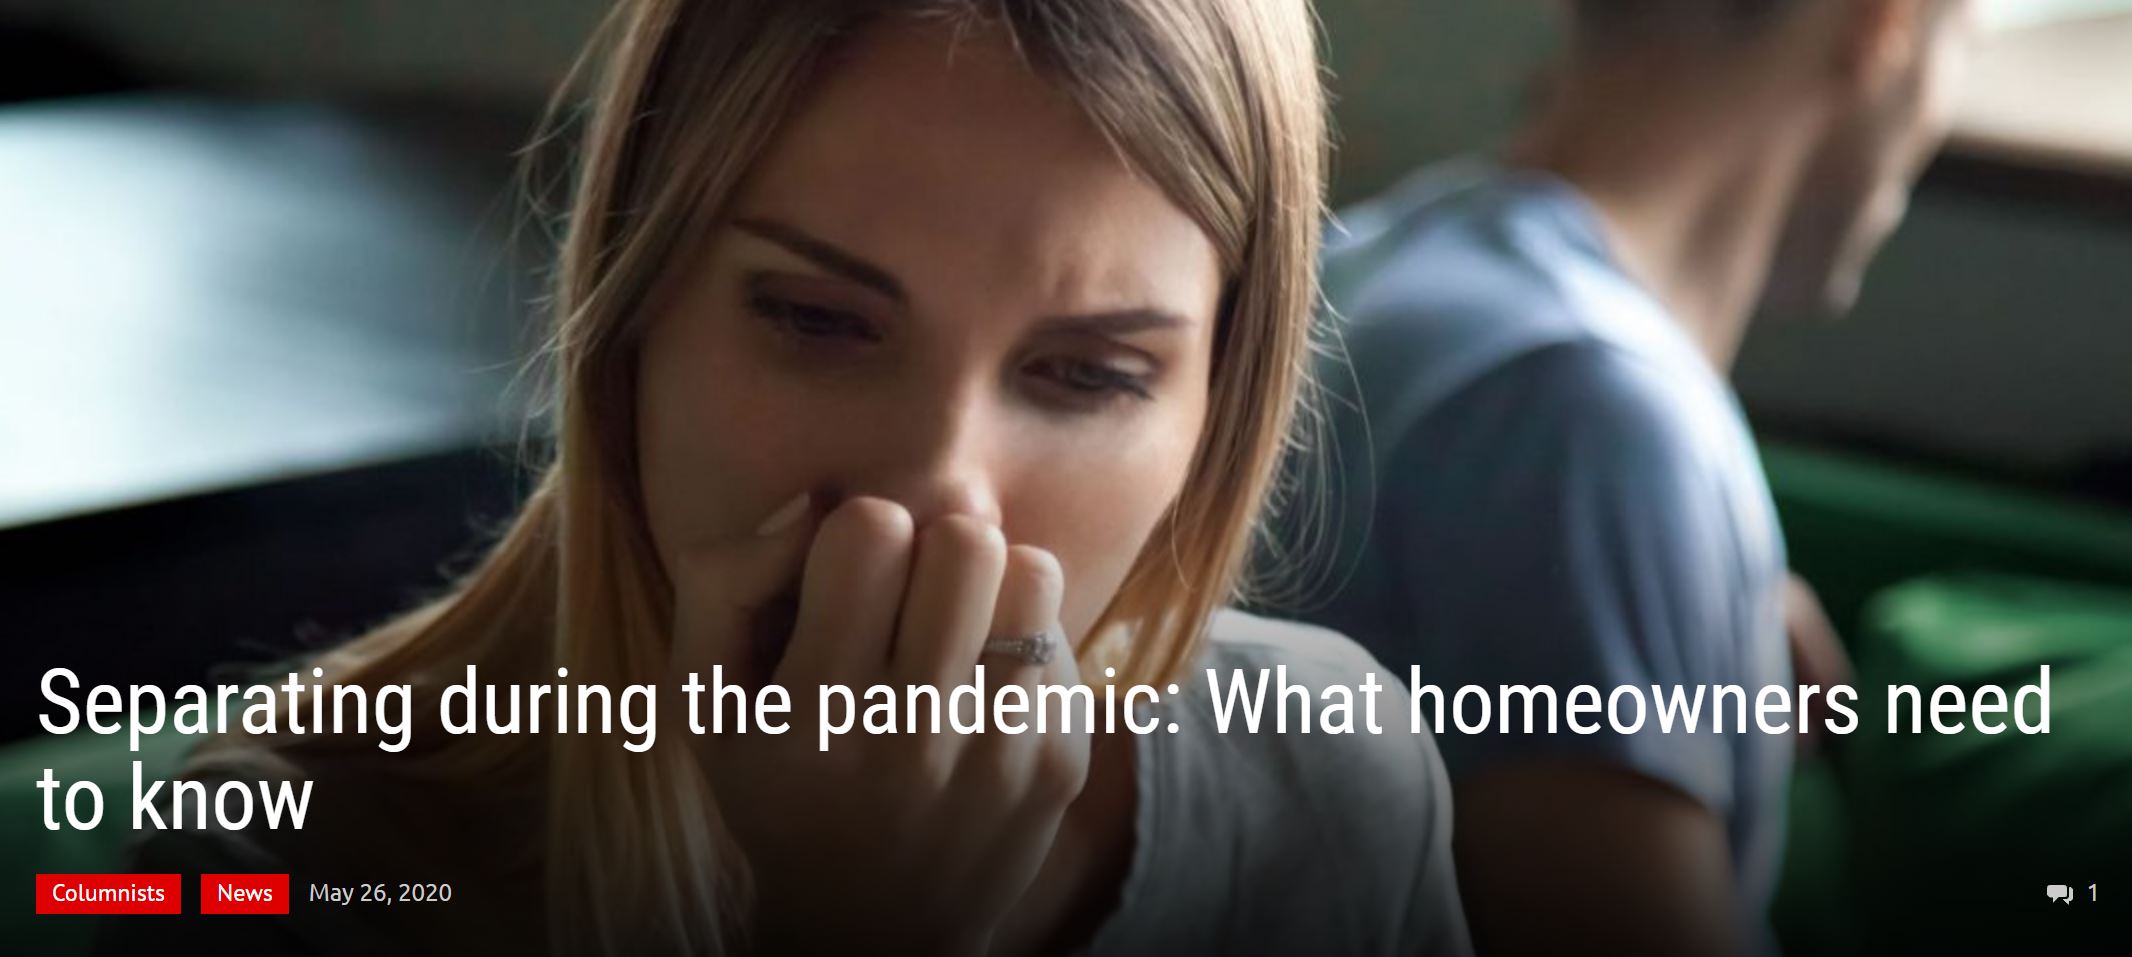 Separating during the pandemic: What homeowners need to know